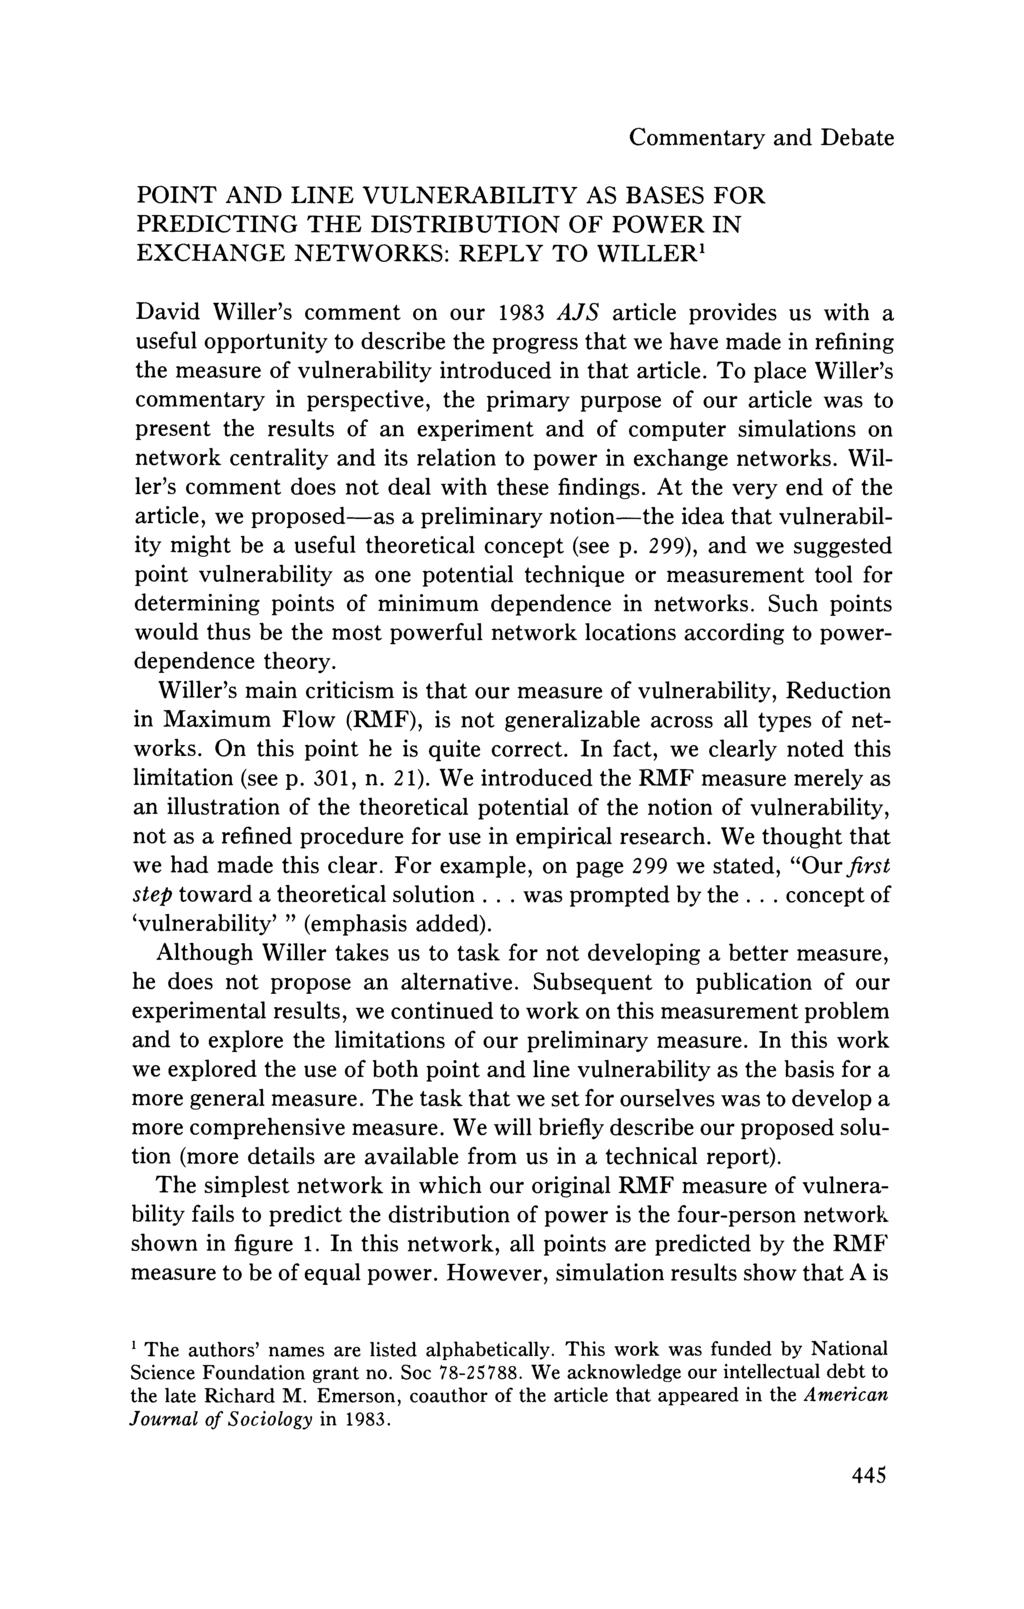 POINT AND LINE VULNERABILITY AS BASES FOR PREDICTING THE DISTRIBUTION OF POWER IN EXCHANGE NETWORKS: REPLY TO WILLER' Commentary and Debate David Willer's comment on our 1983 AJS article provides us